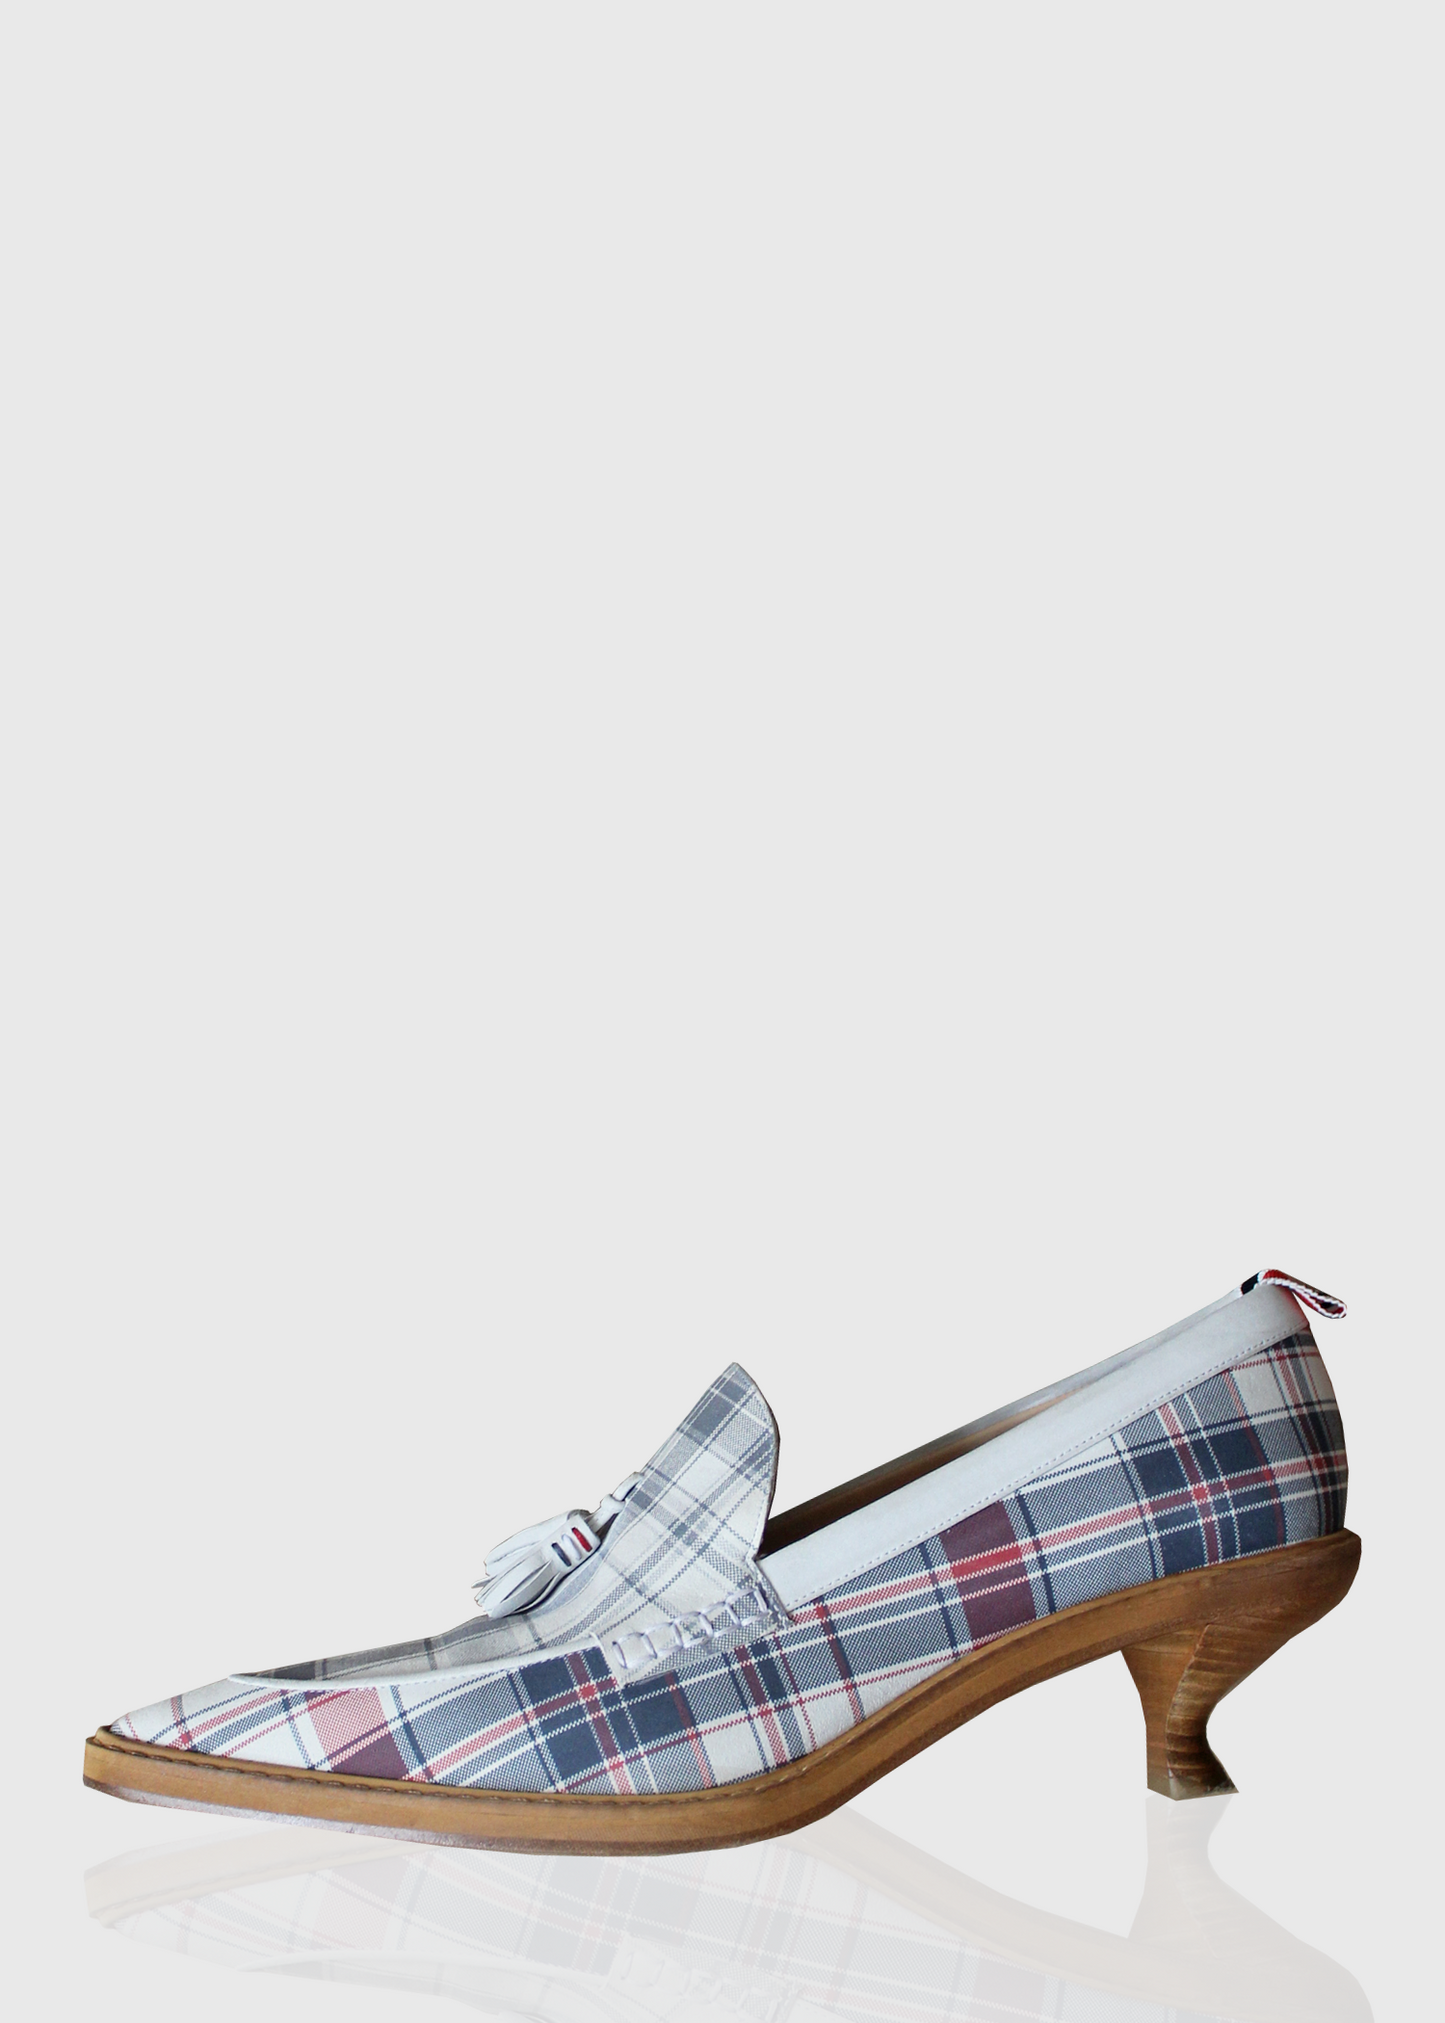 A side view of the Thom Browne shoes that feature a very pointed toe, tassels, and a stacked, curved wooden kitten heel. Rendered in signature blue and white Thom Browne plaid and a red, white, and blue stripped lining.